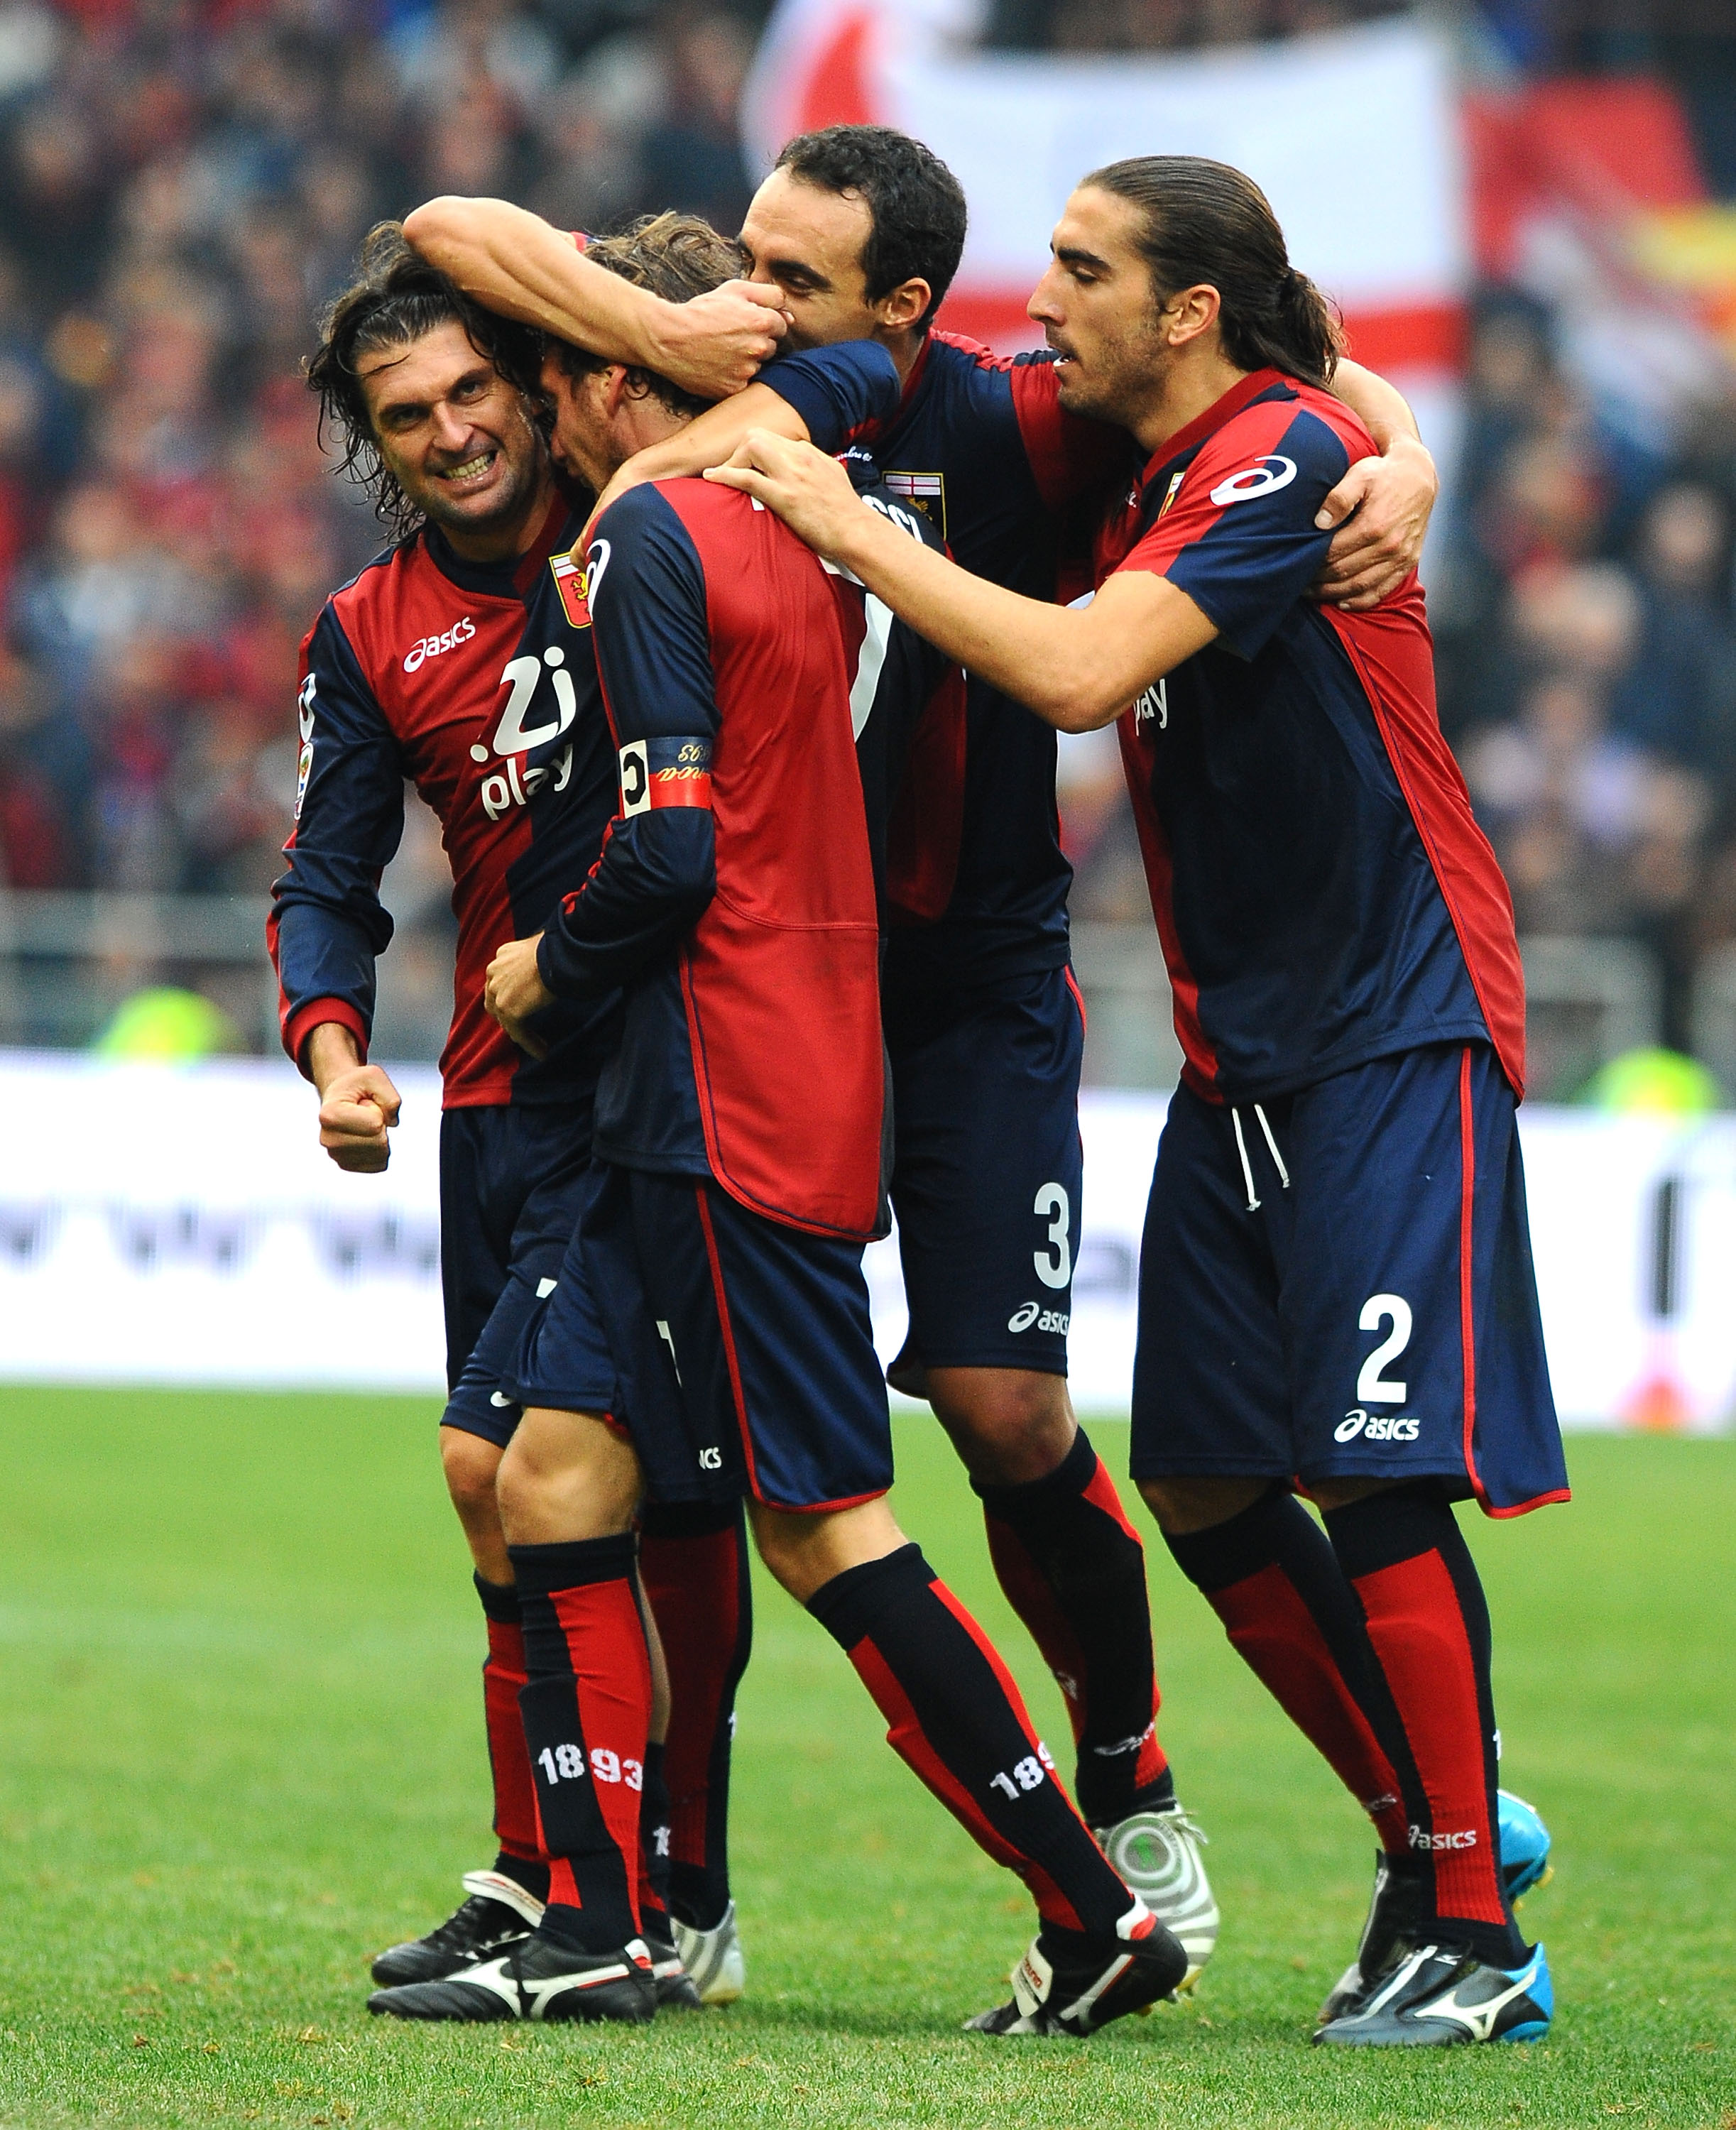 Genoa celebrate after Marco Rossi's goal proved to be the game winner against Catania.